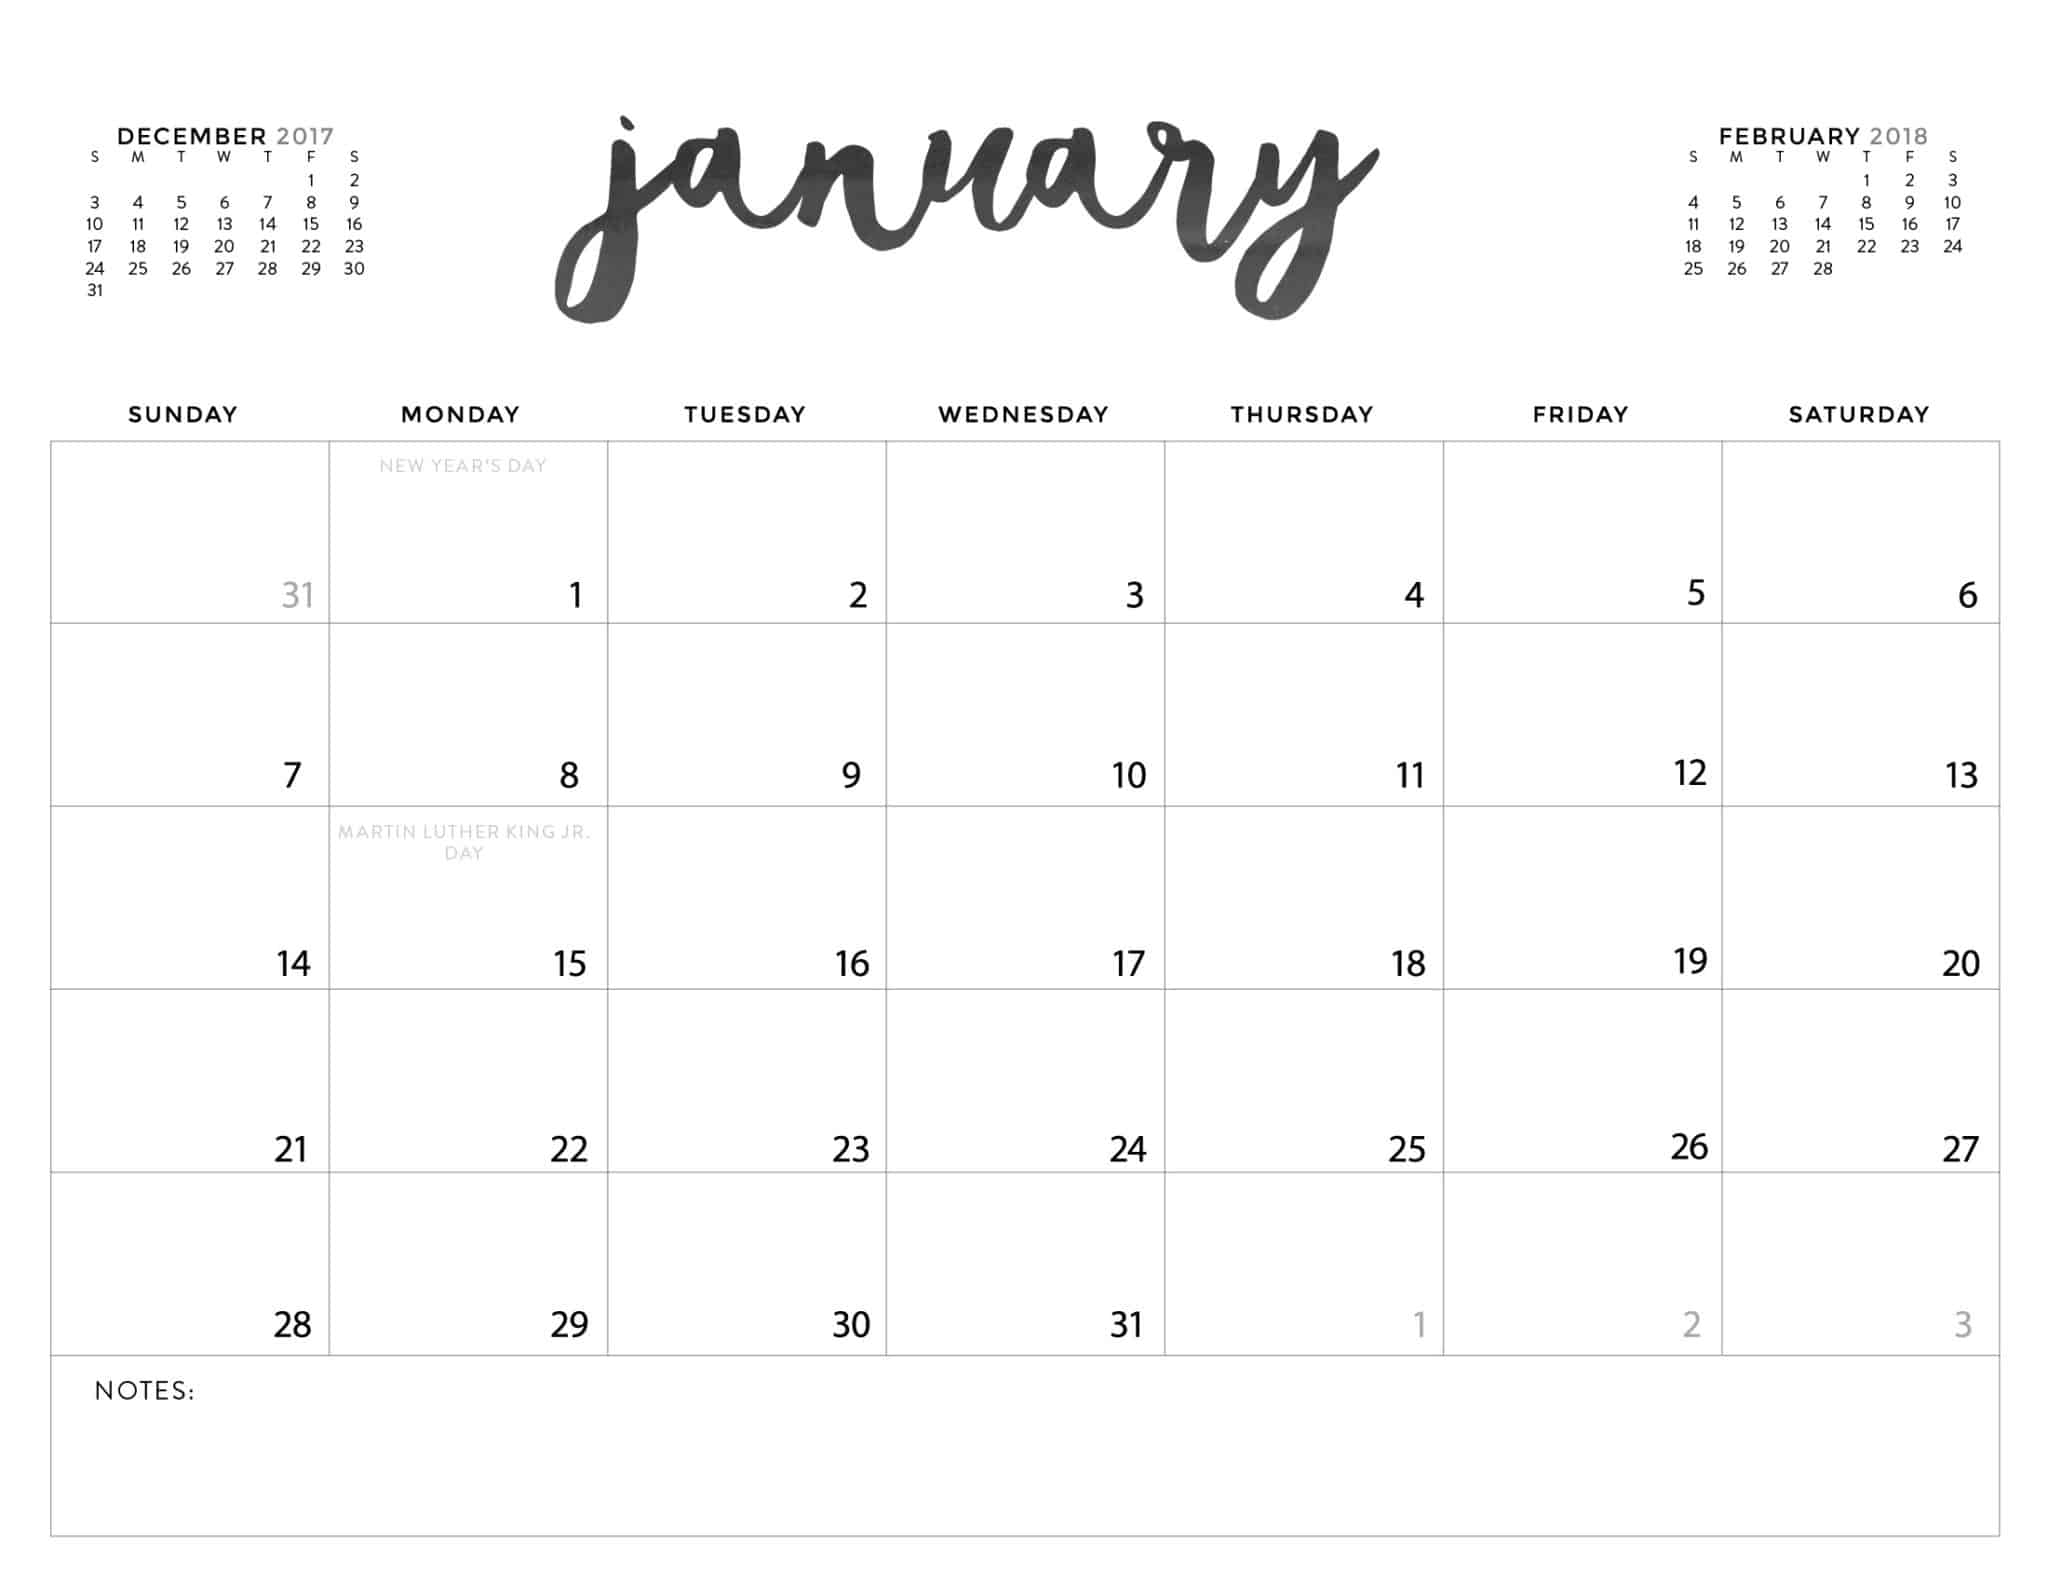 Download Your Free 2018 Printable Calendars Today! There